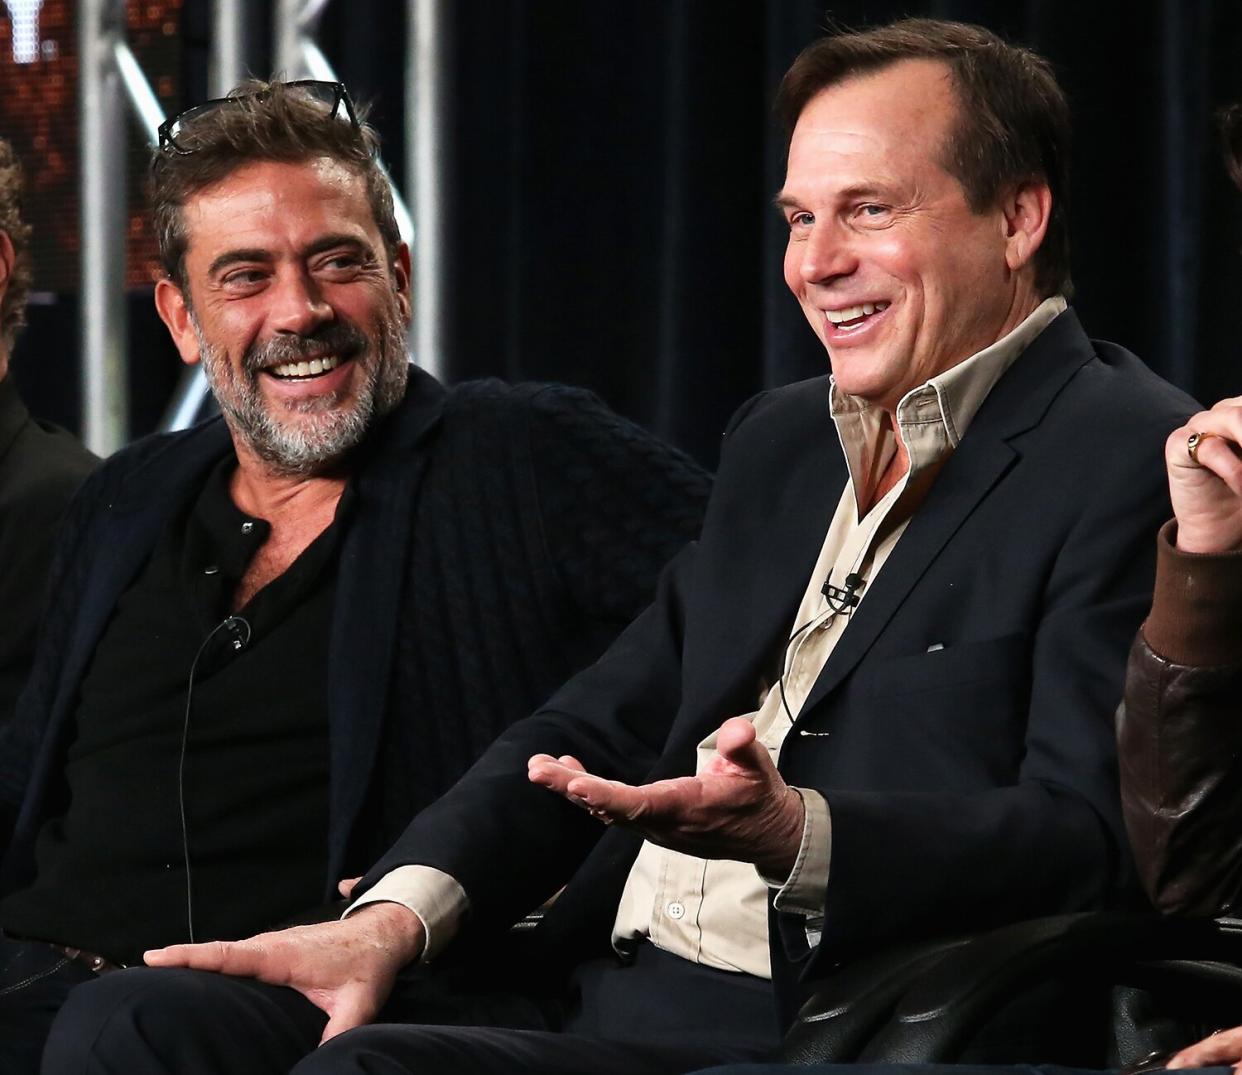 Jeffrey Dean Morgan and Bill Paxton speak onstage during the 'Texas Rising' panel at the A&E Networks portion of the 2015 Winter Television Critics Association press tour at the Langham Hotel on January 9, 2015 in Pasadena, California.